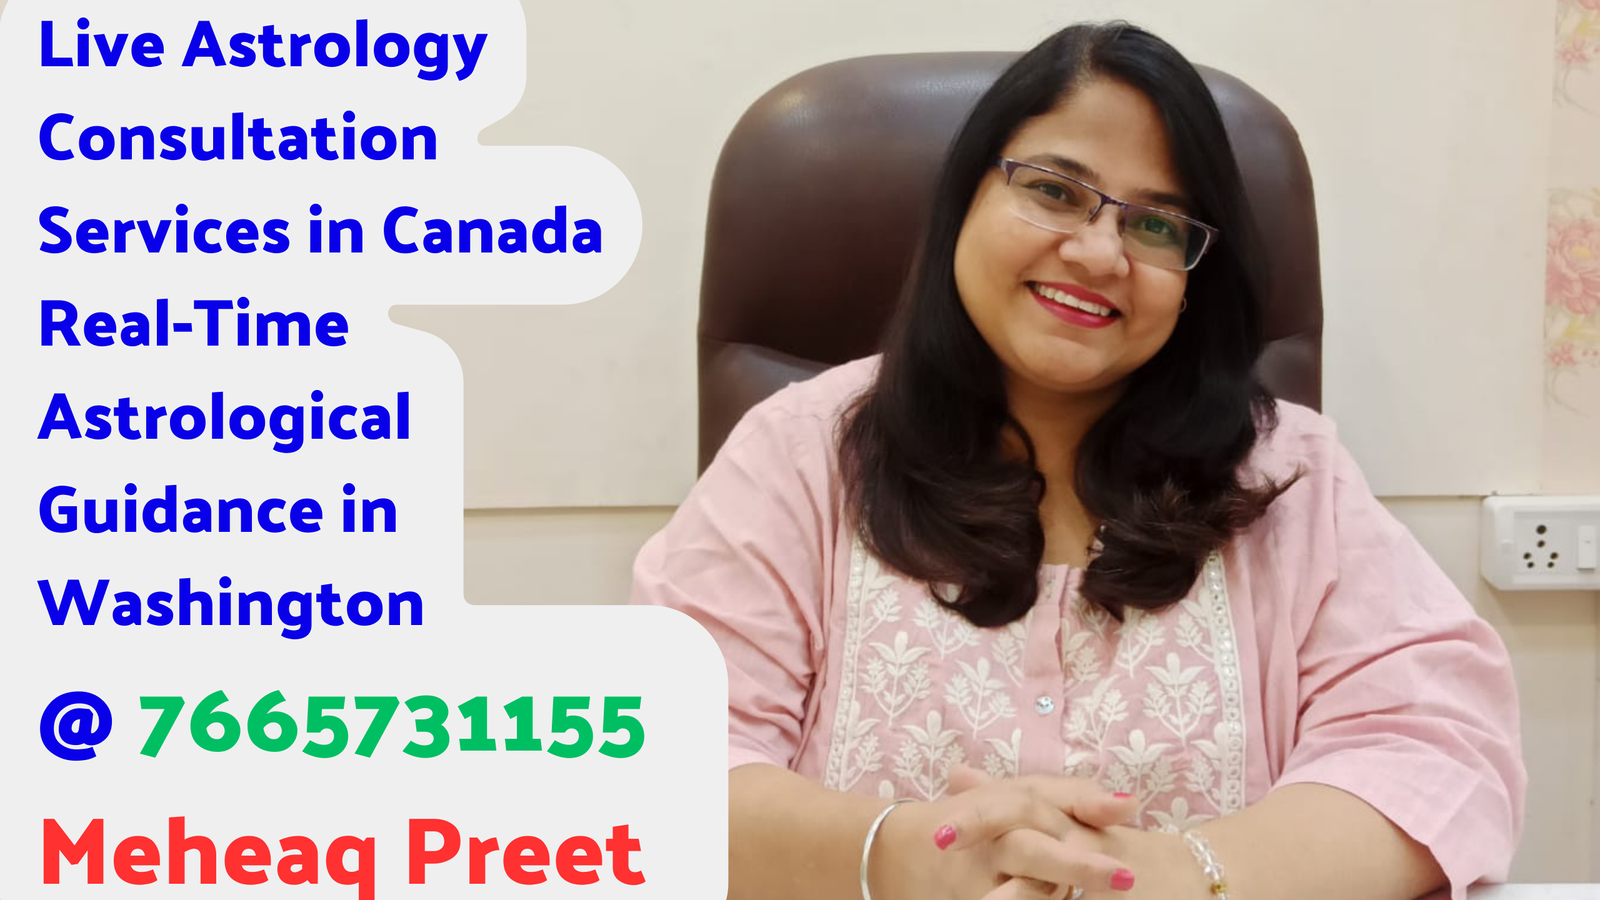 Live Astrology Consultation Services in Canada Real-Time Astrological Guidance in Washington